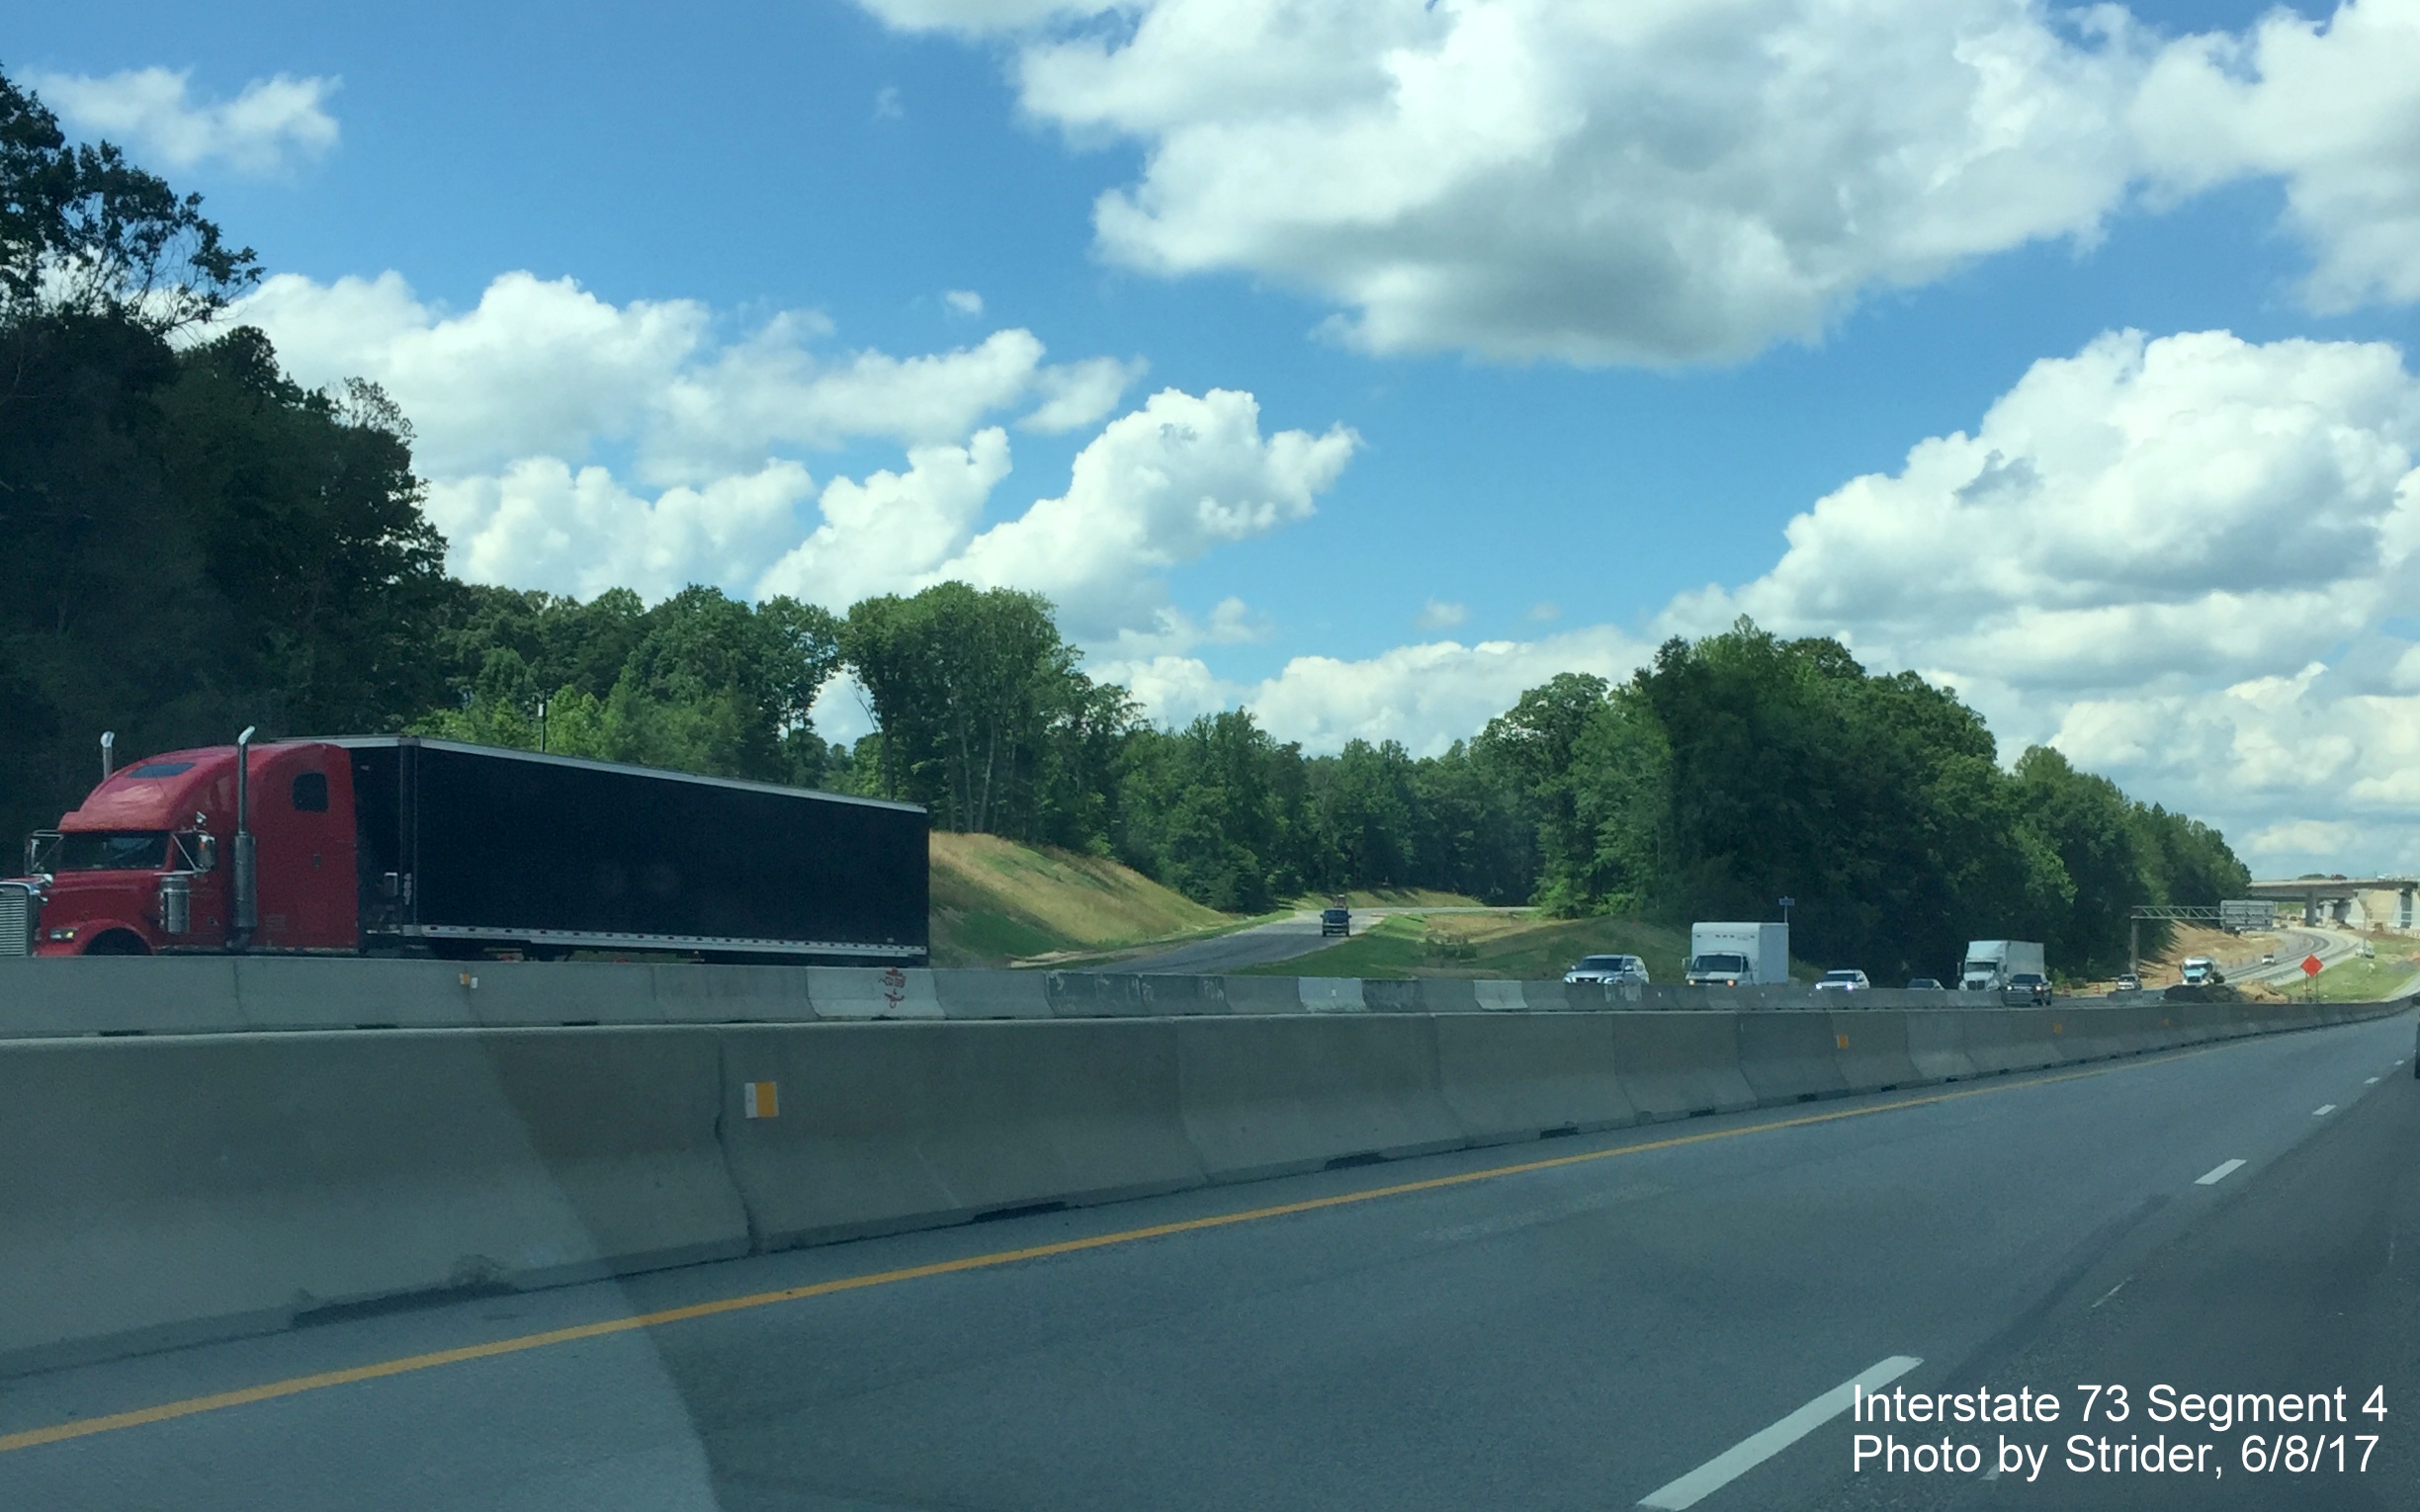 Image taken of I-73 Connector construction seen from NC 68 North in Greensboro, by Strider